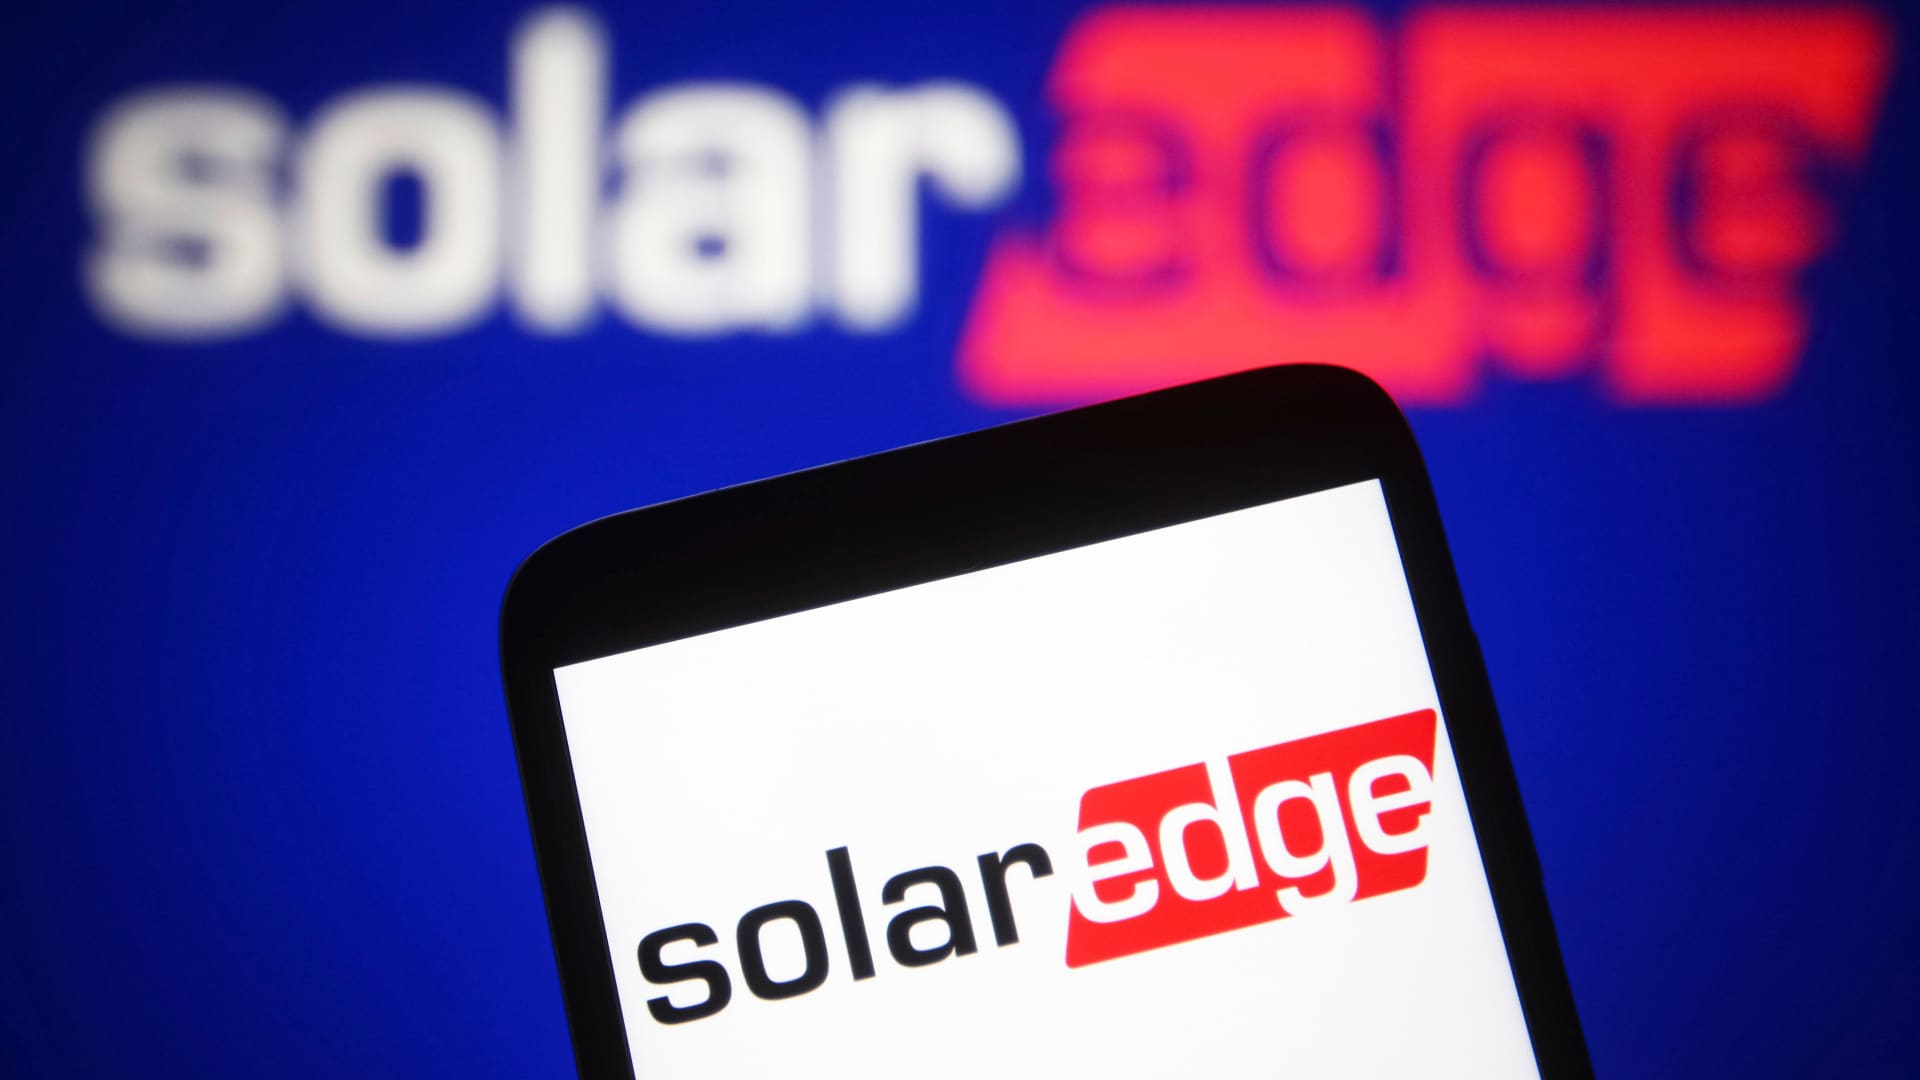 SolarEdge shares sink 21% after company offers weak Q4 guidance